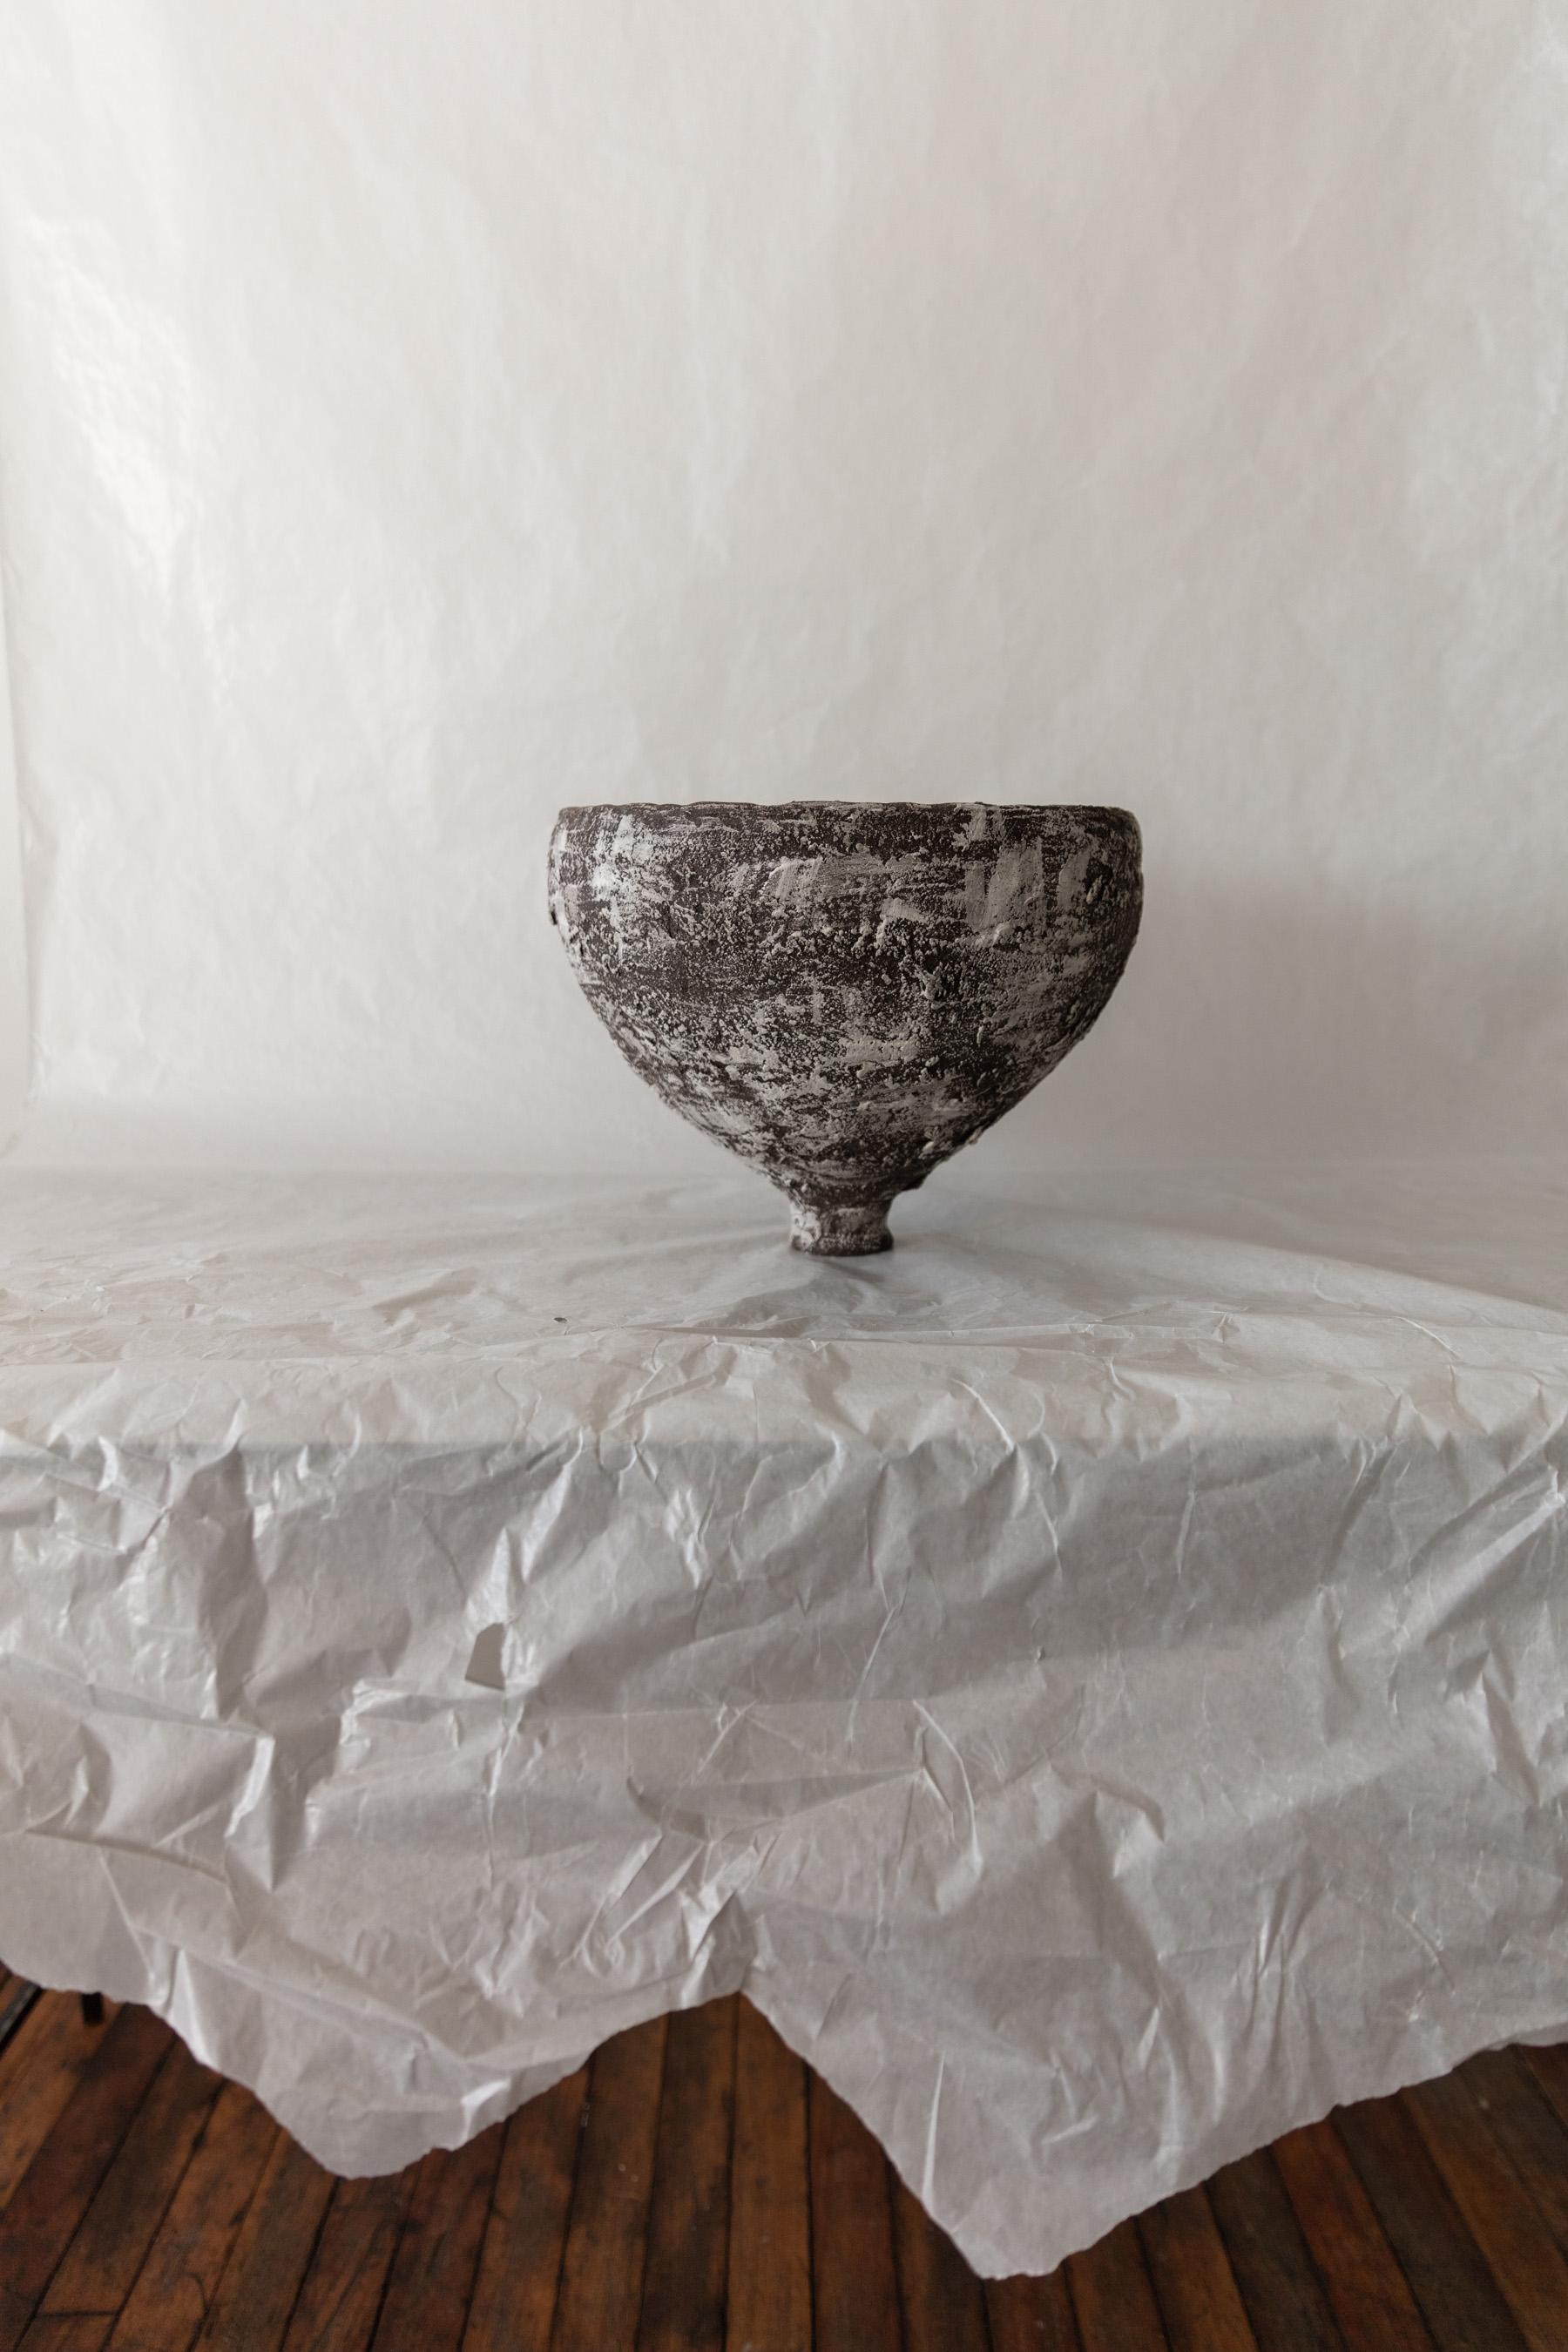 The Tulip Bowl is a one-of-a-kind handcrafted creation by Ilona Golovina, showcasing her unwavering dedication to emphasizing imperfection. 

Crafted from dark sculpture clay, with a white terra sigillata brushed detail that smartly displays the